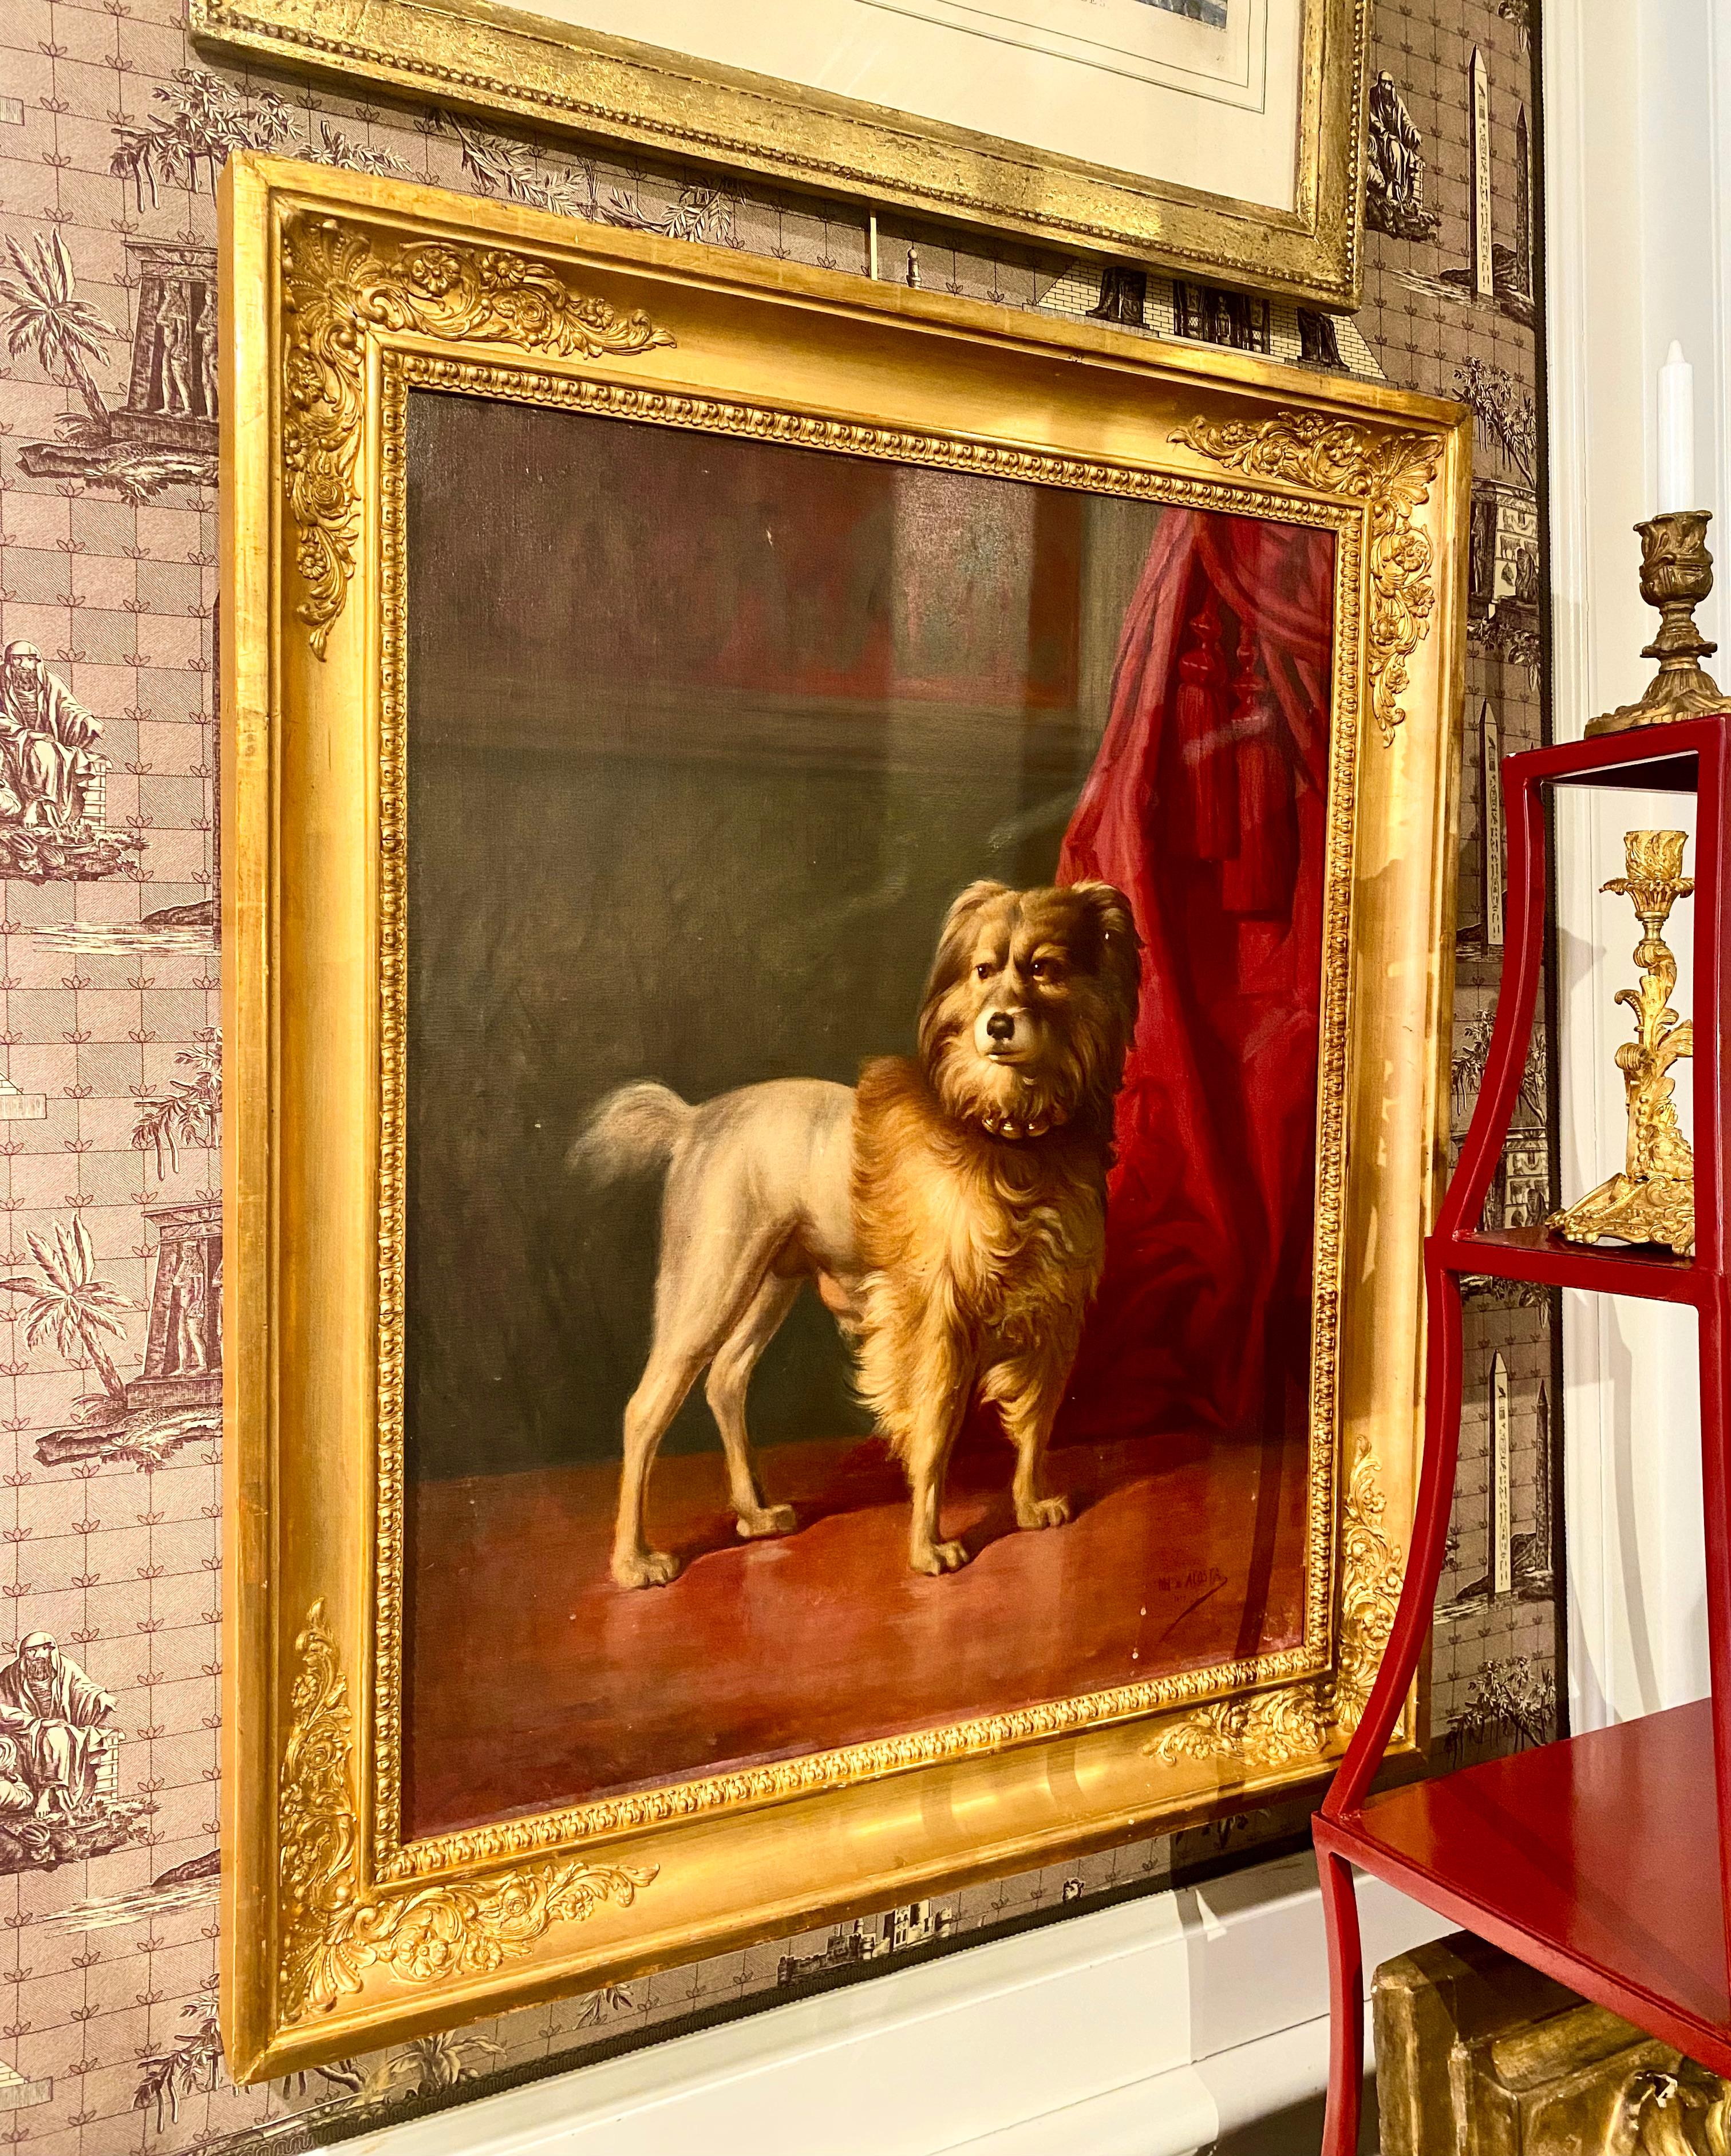 Portrait of Friel, Dog of the Dukes of Osuna, by Marcos Hiràldez Di Acosta, 1879

Splendid large signed painting made by Marcos Hiráldez De Acosta (1830-1896), a protégé of the Duke of Osuna's family, from Madrid. 

The Duke's faithful dog